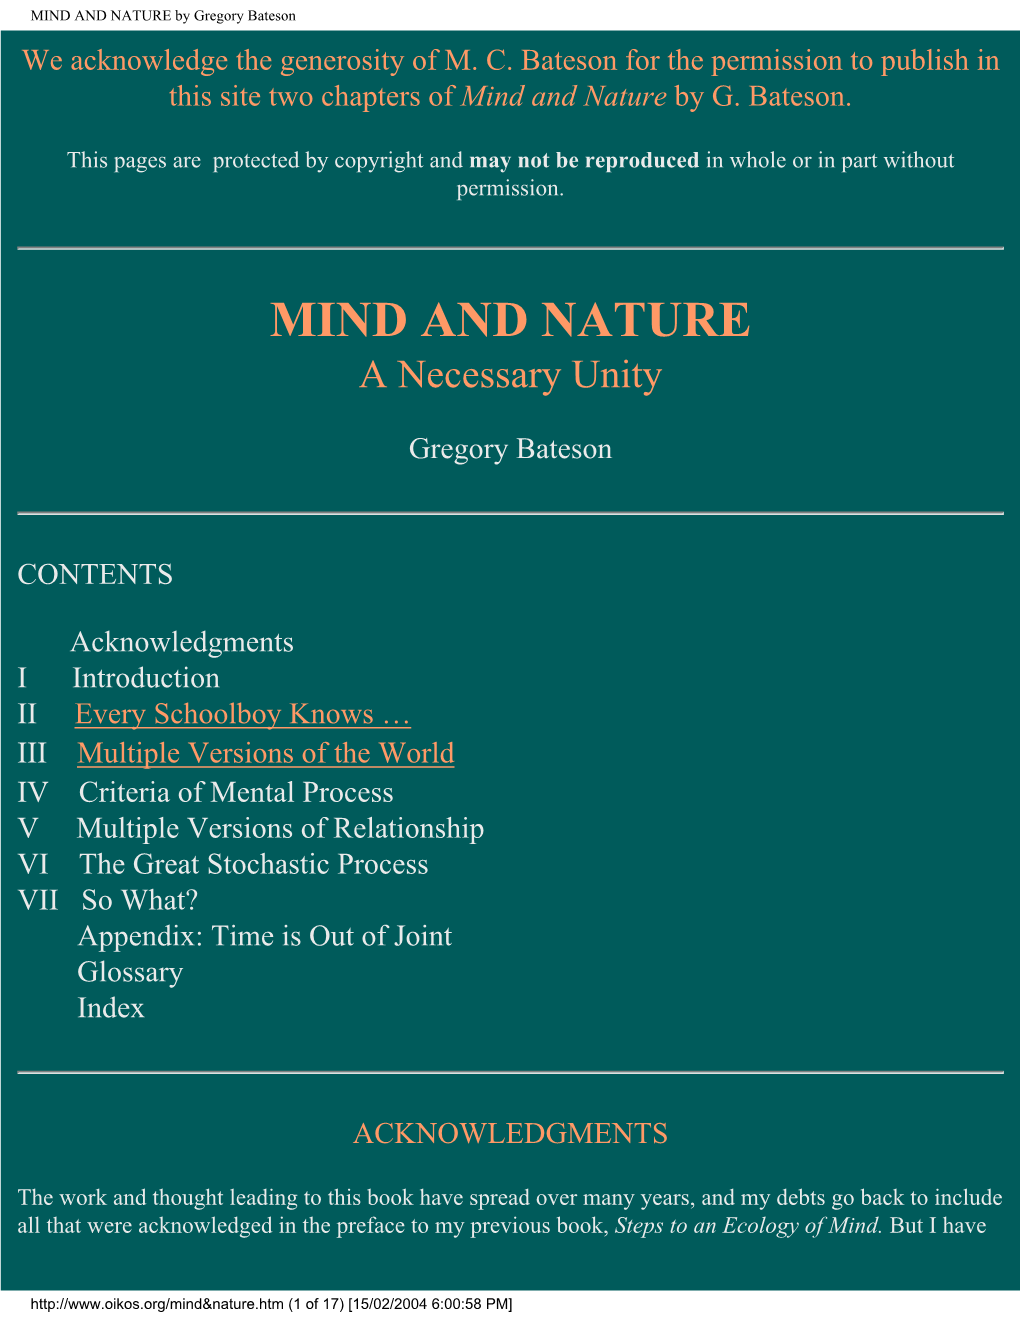 MIND and NATURE by Gregory Bateson We Acknowledge the Generosity of M